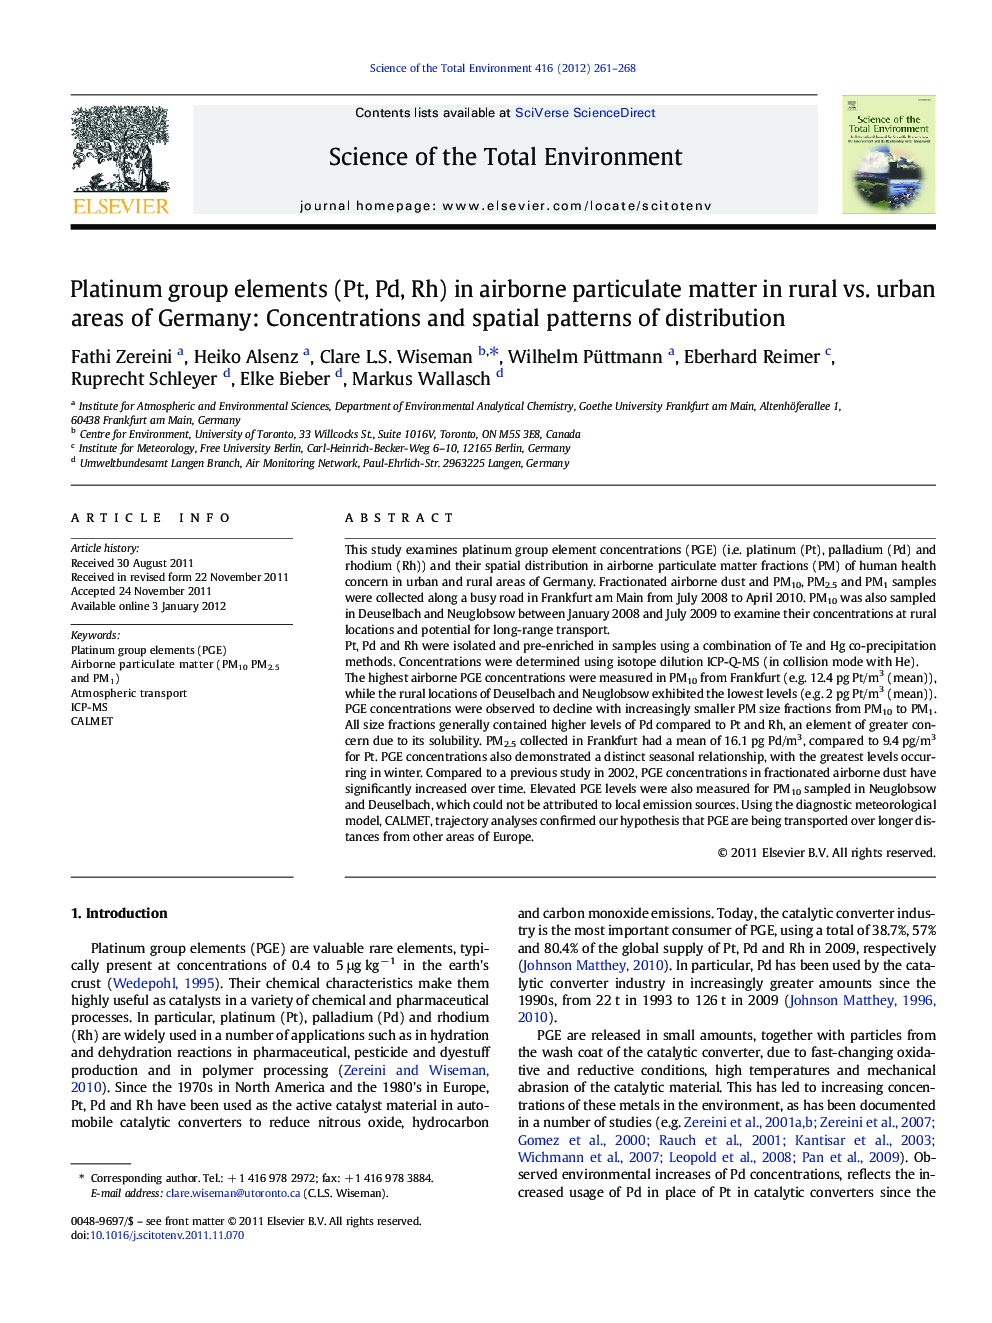 Platinum group elements (Pt, Pd, Rh) in airborne particulate matter in rural vs. urban areas of Germany: Concentrations and spatial patterns of distribution